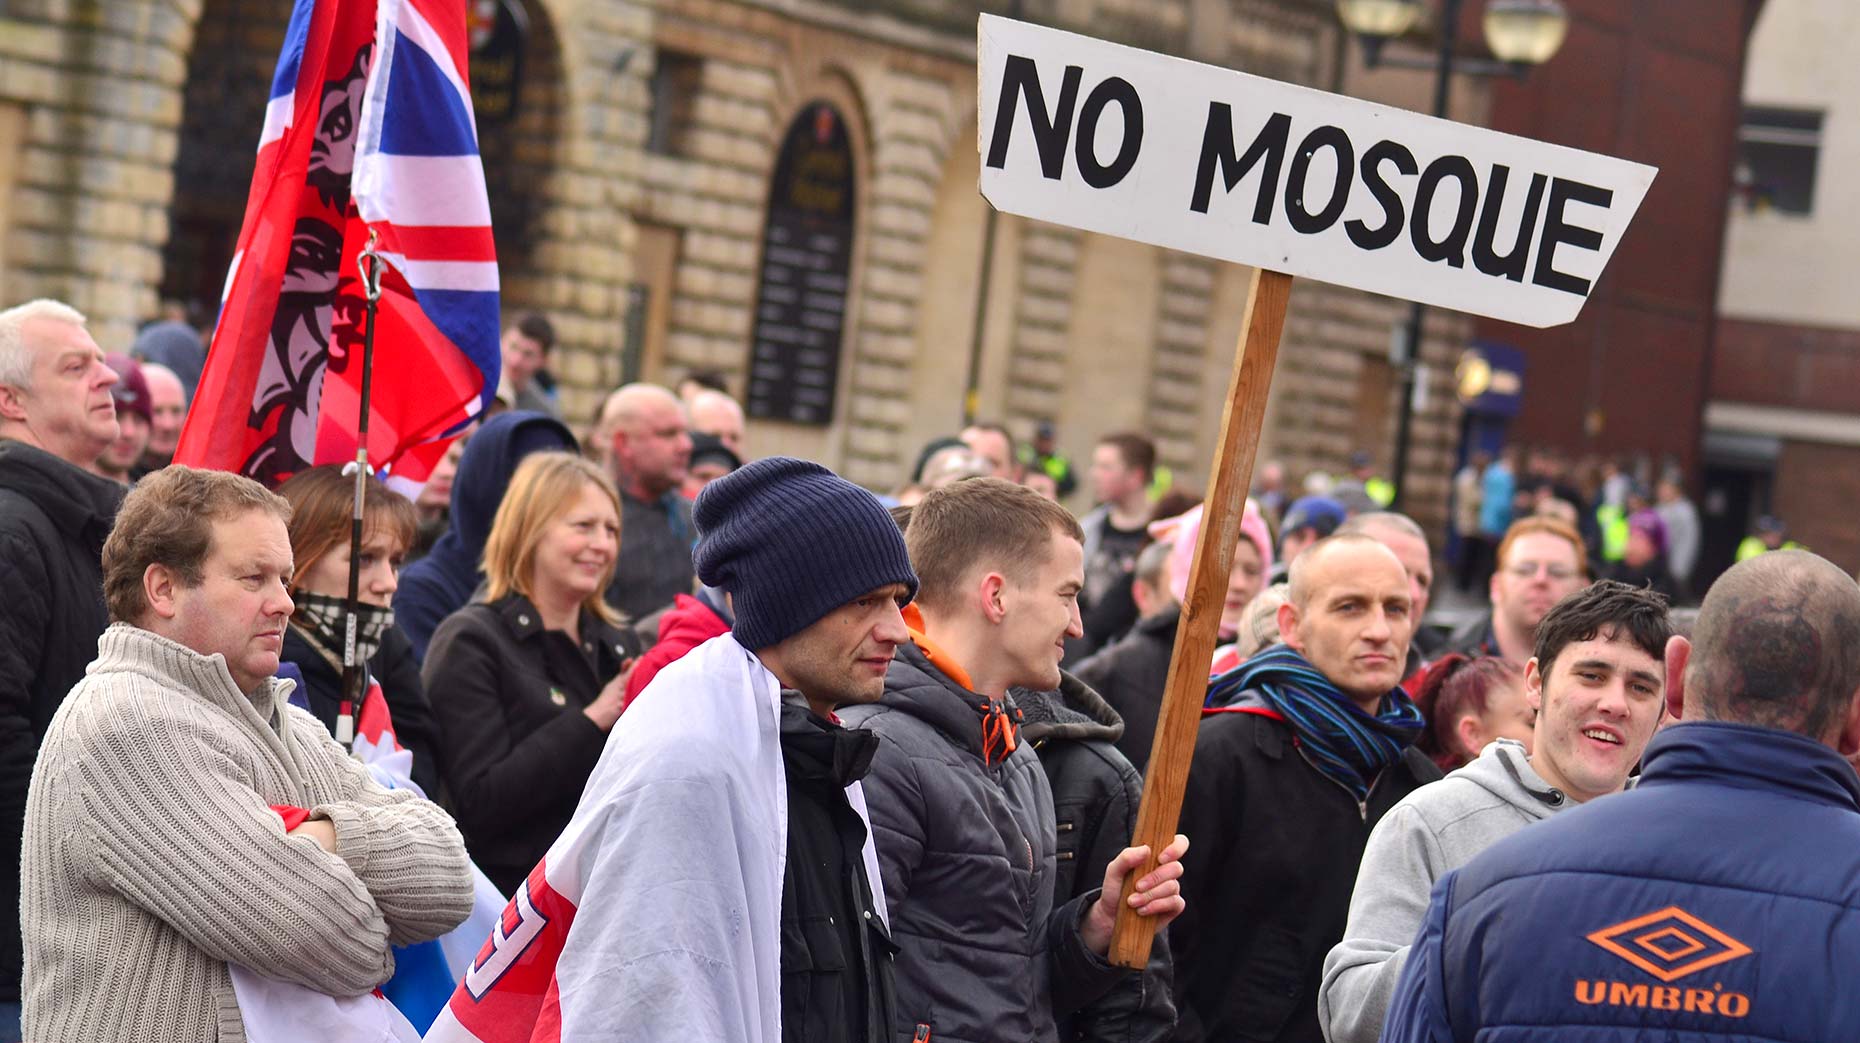 Supporters at the anti-mosque protest. Photo: Steve Smailes for The Lincolnite